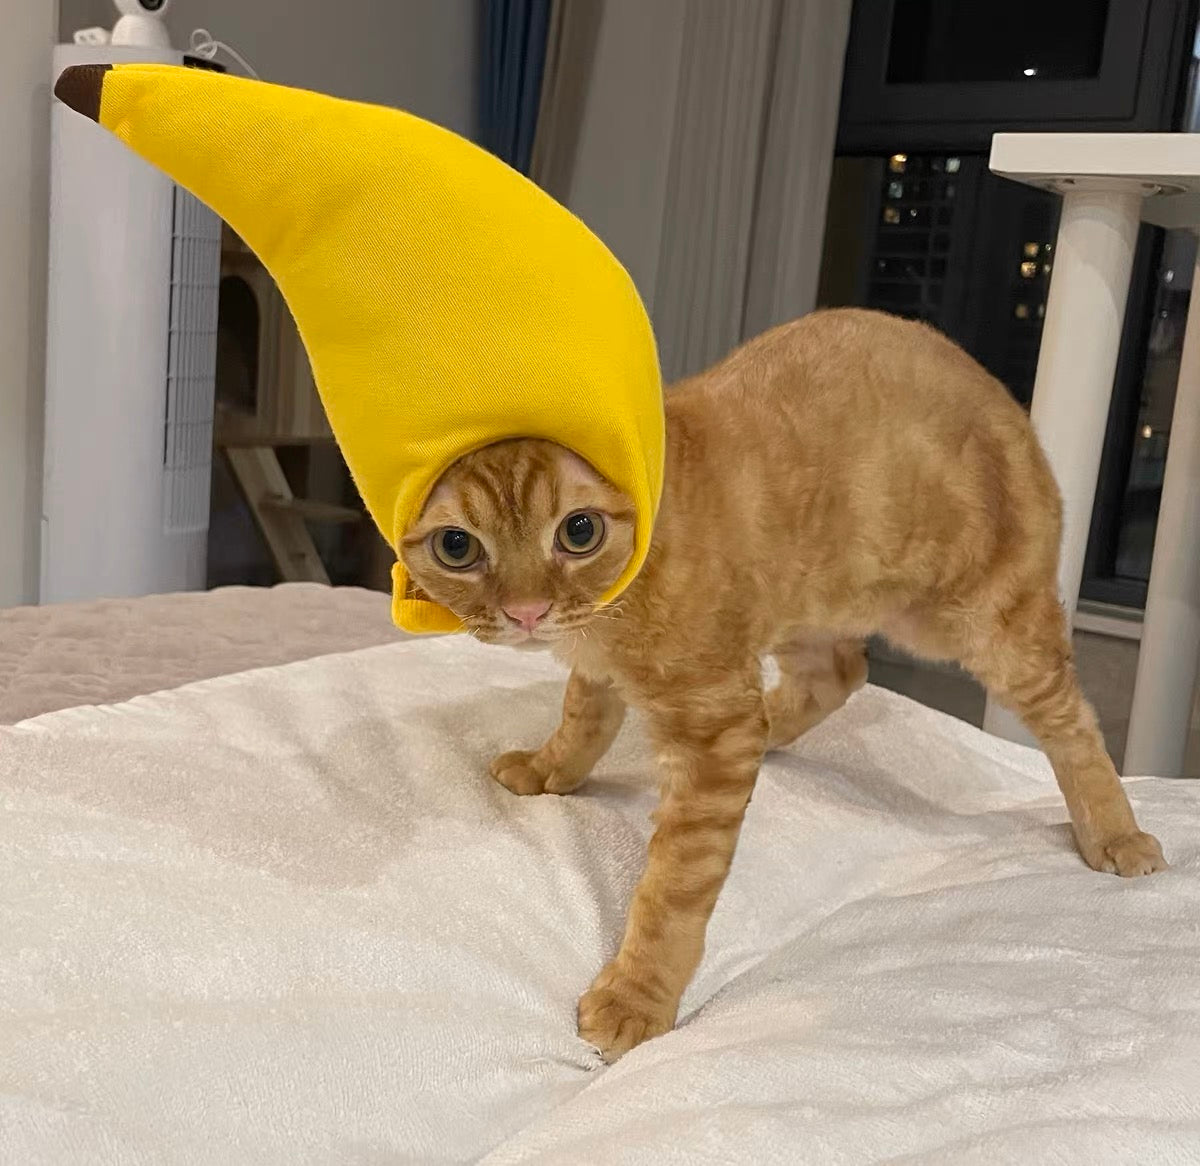 Banana Adjustable Pet Hat for Cats and Dogs - Lil Wild Pets